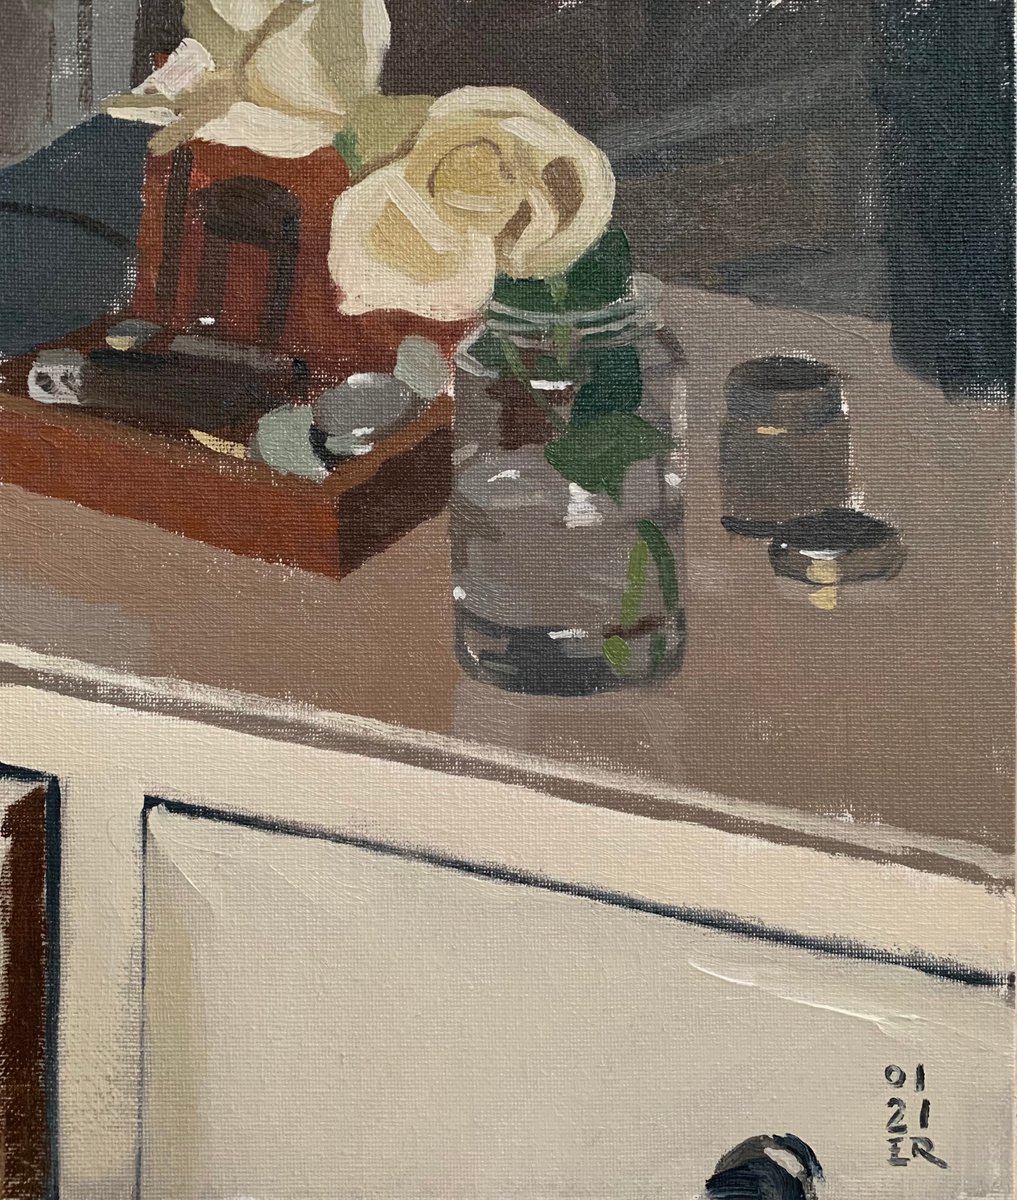 White Roses and Jar by Elliot Roworth